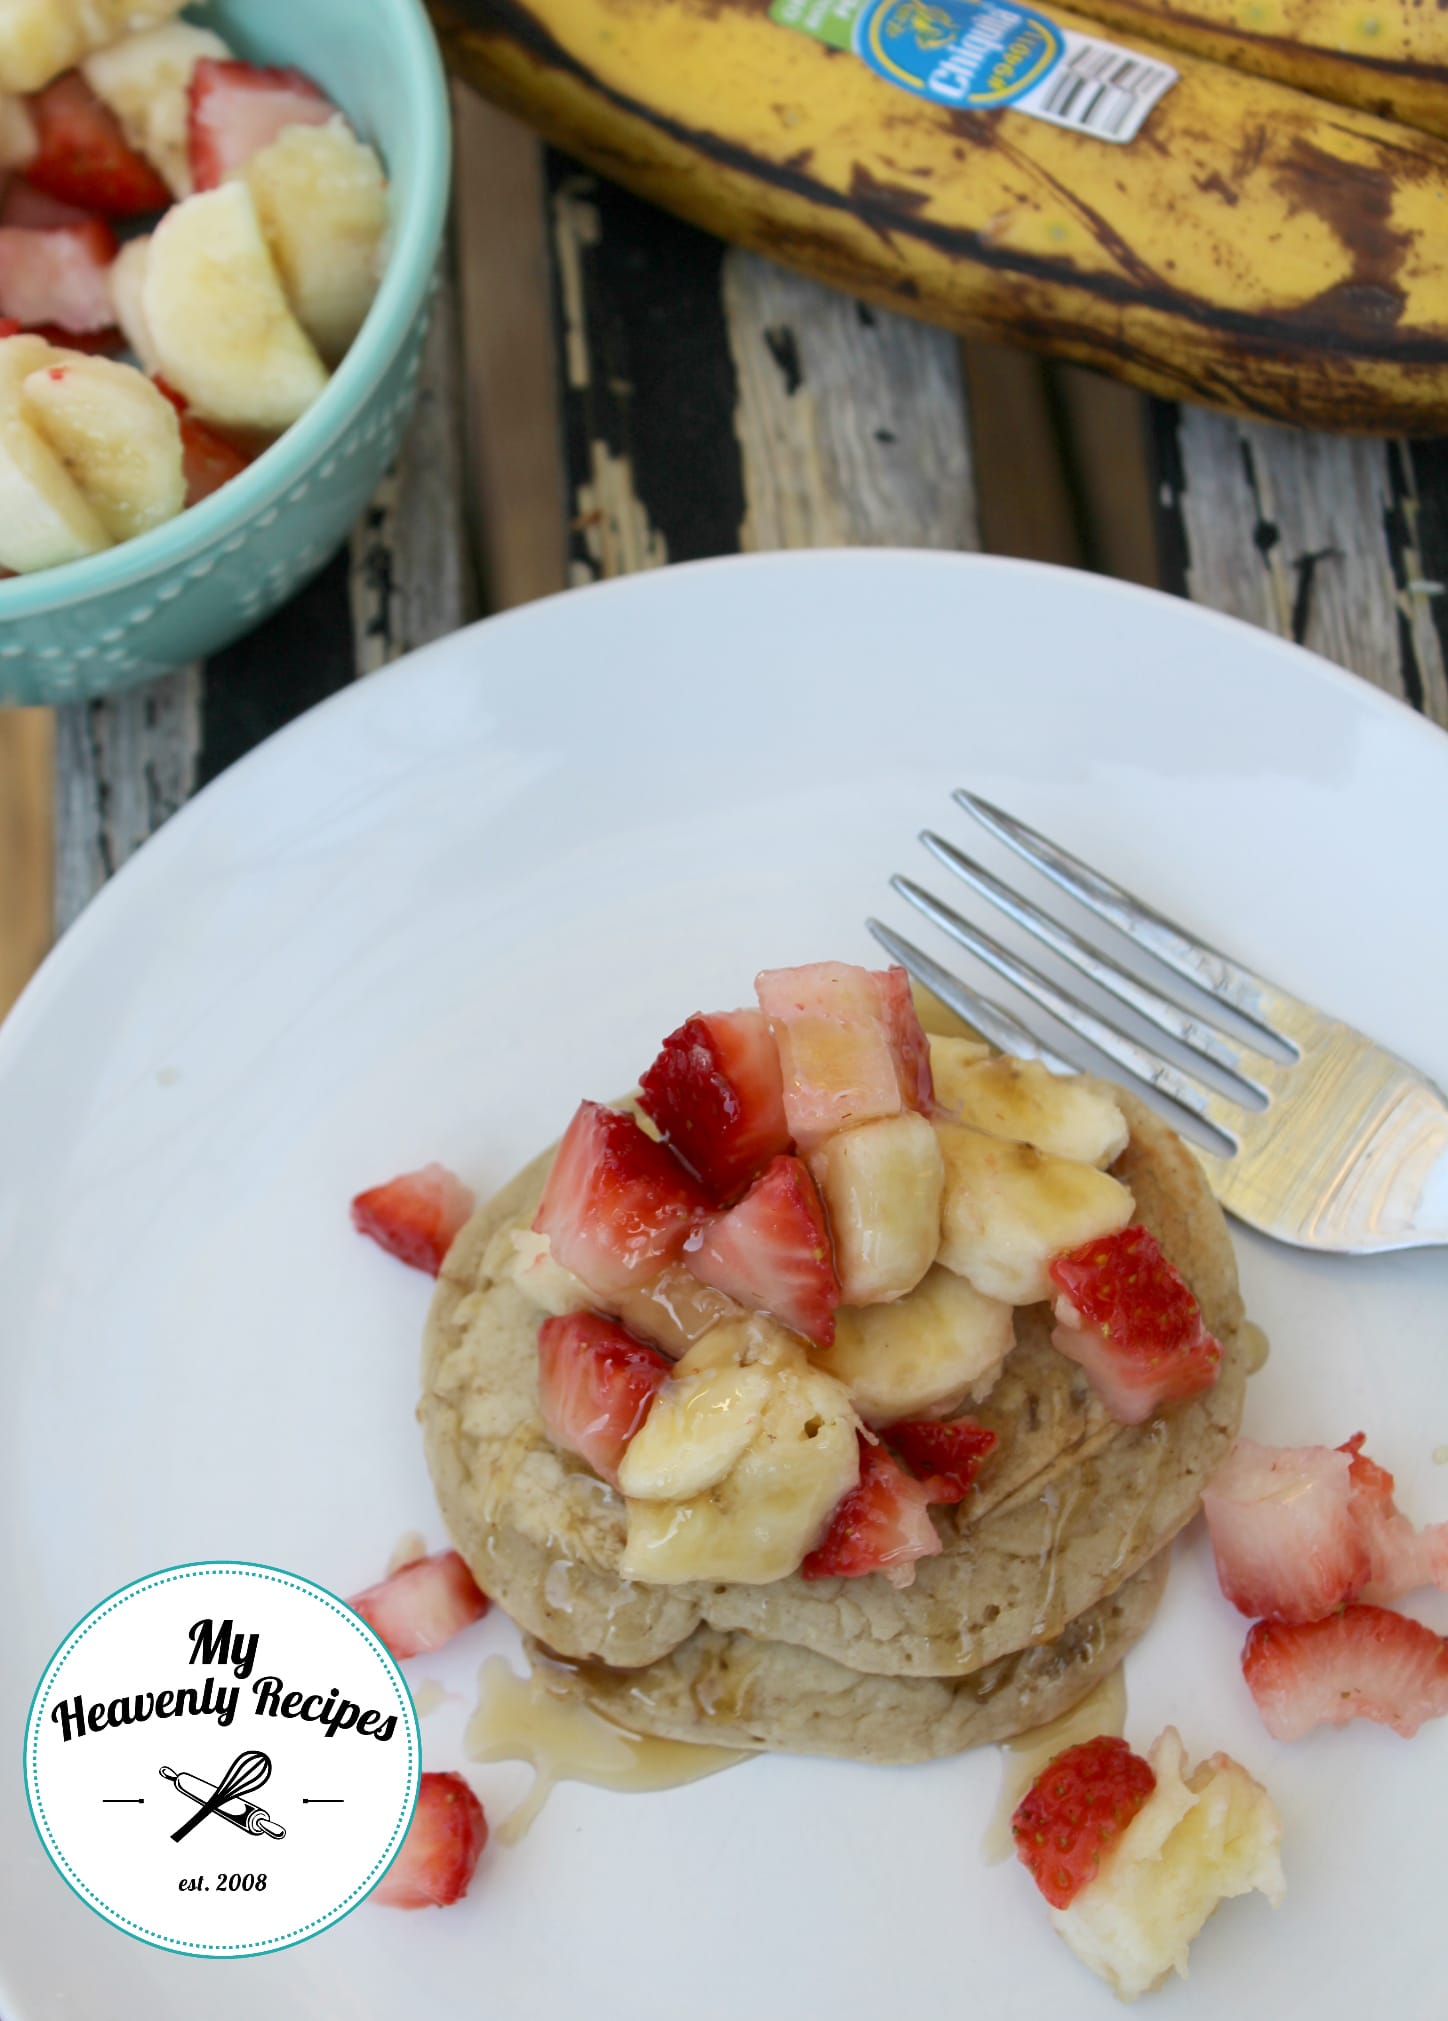 Top these Healthy Banana Pancakes with strawberries and bananas for a over the top breakfast recipe.